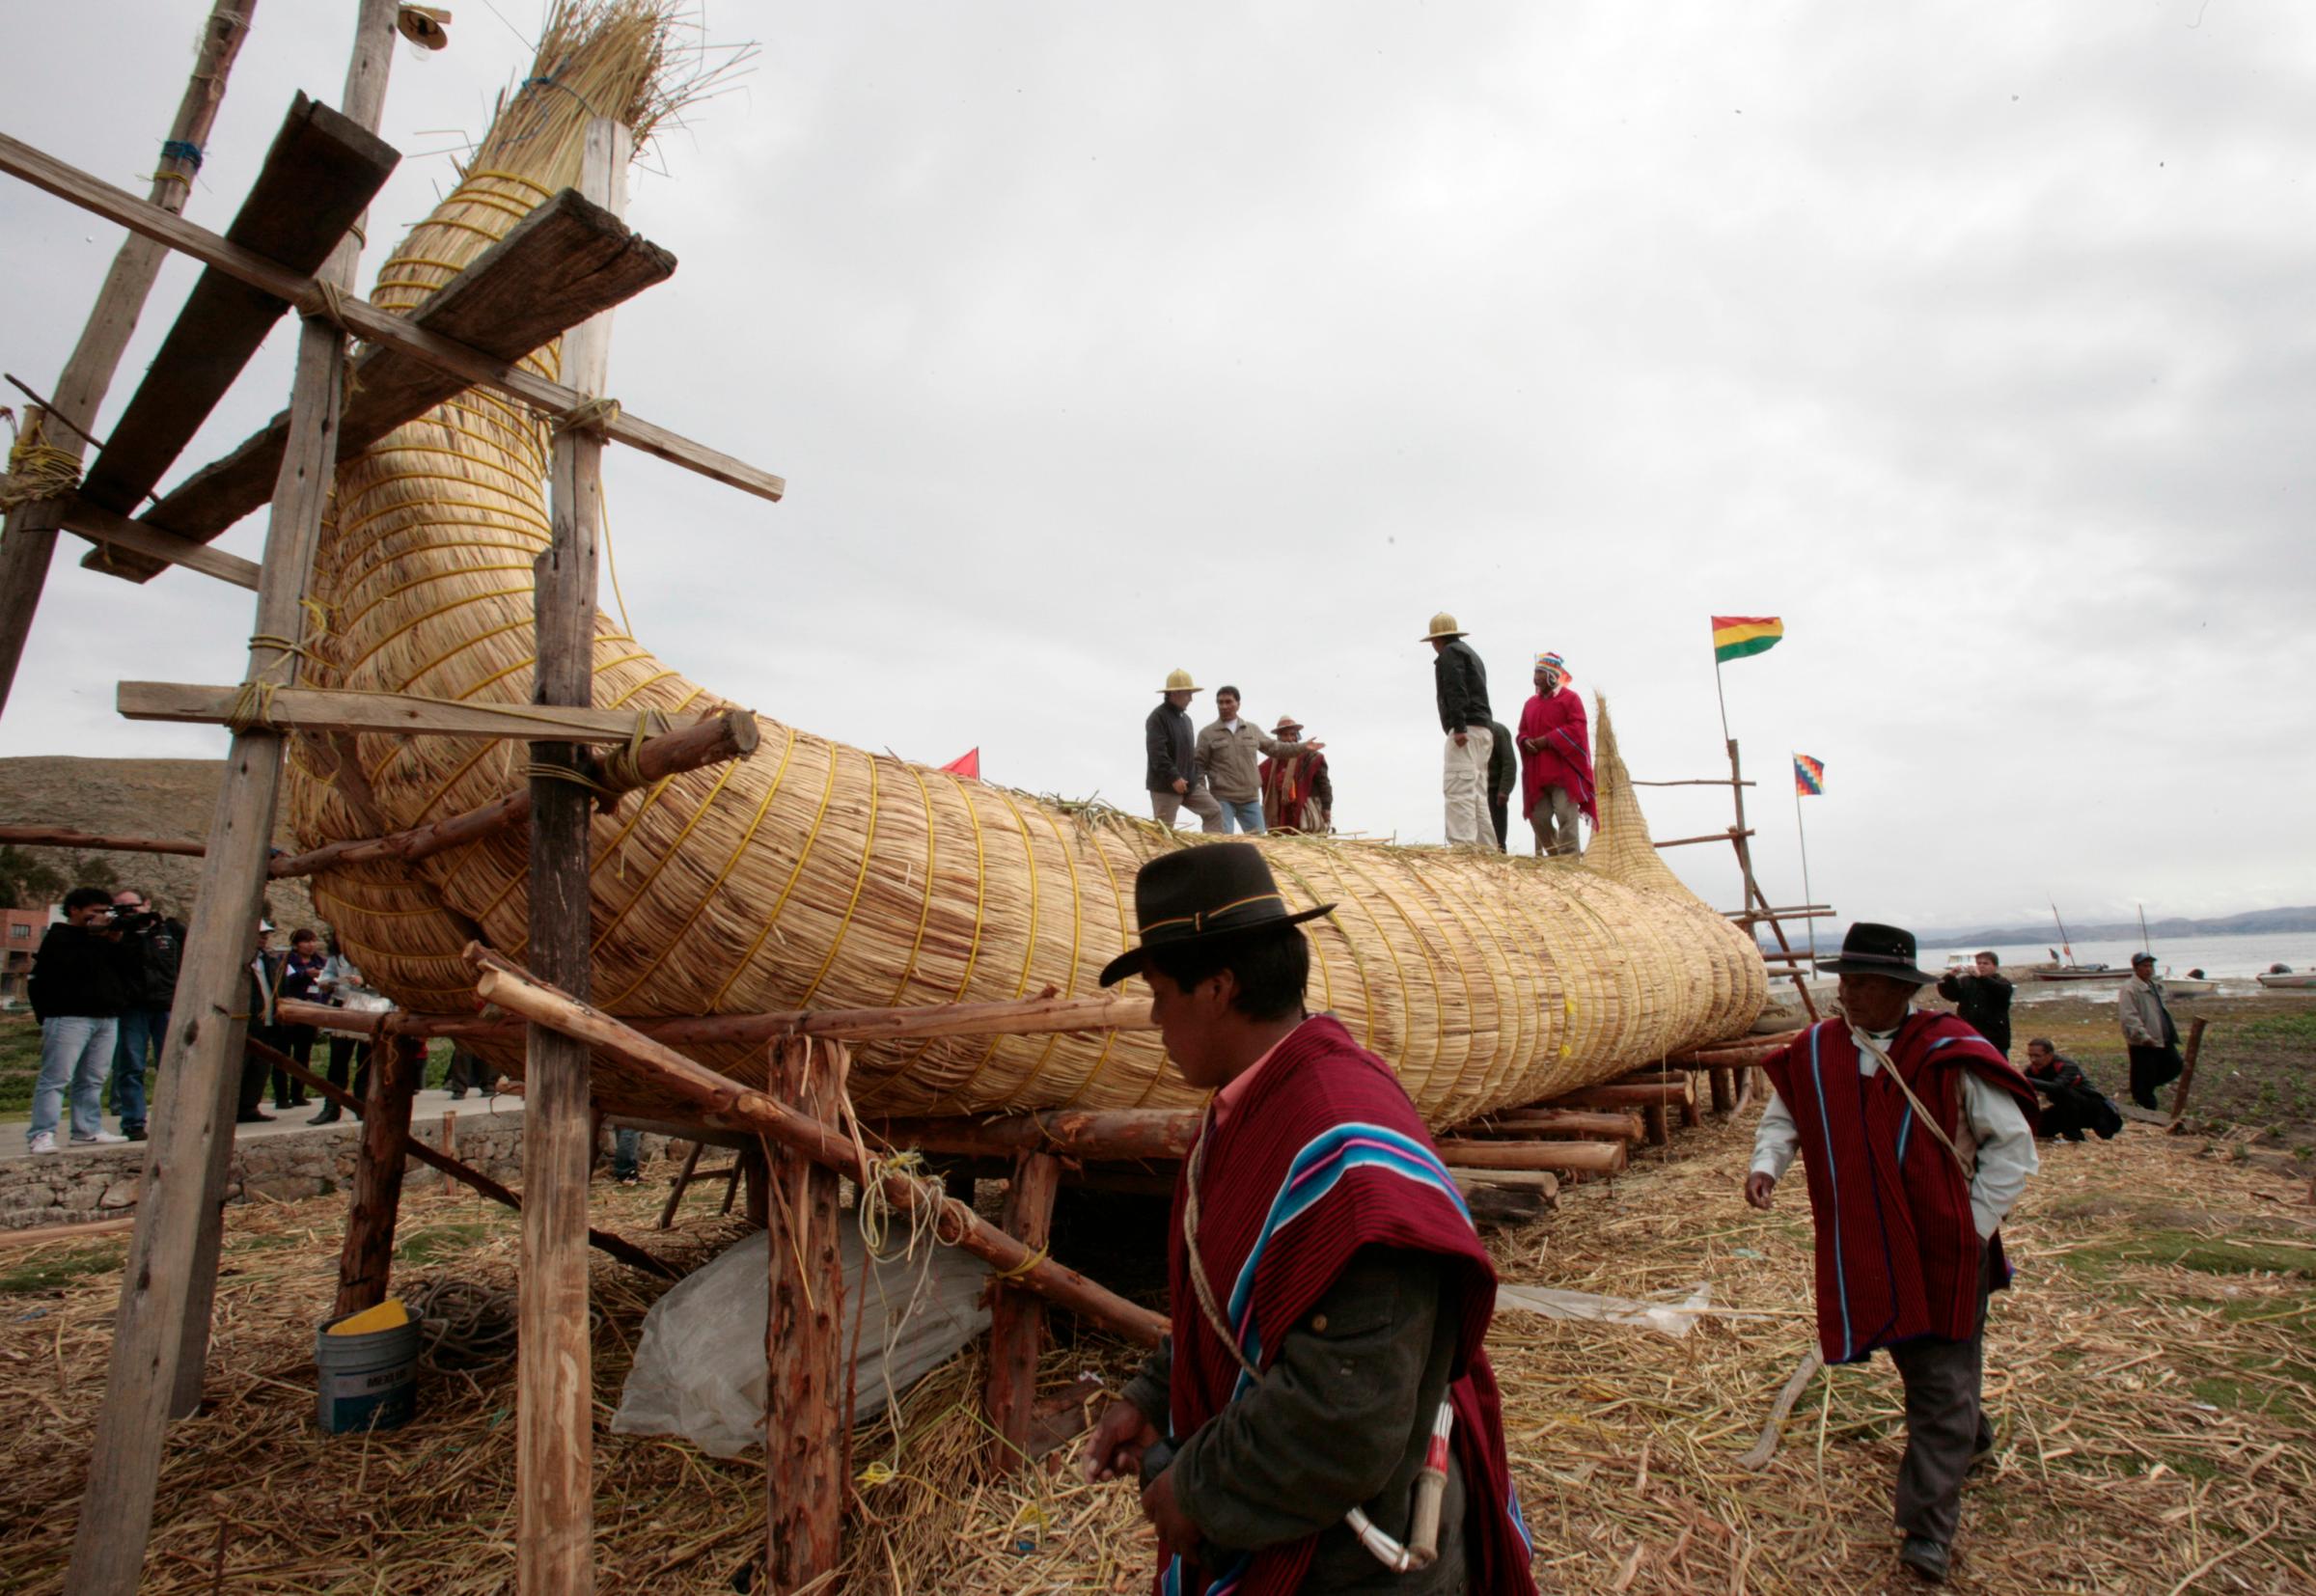 Members of the Limachi family, and others from the community living along the shores of Lake Titacaca, inspect a reed boat in Suriqui island on Lake Titicaca